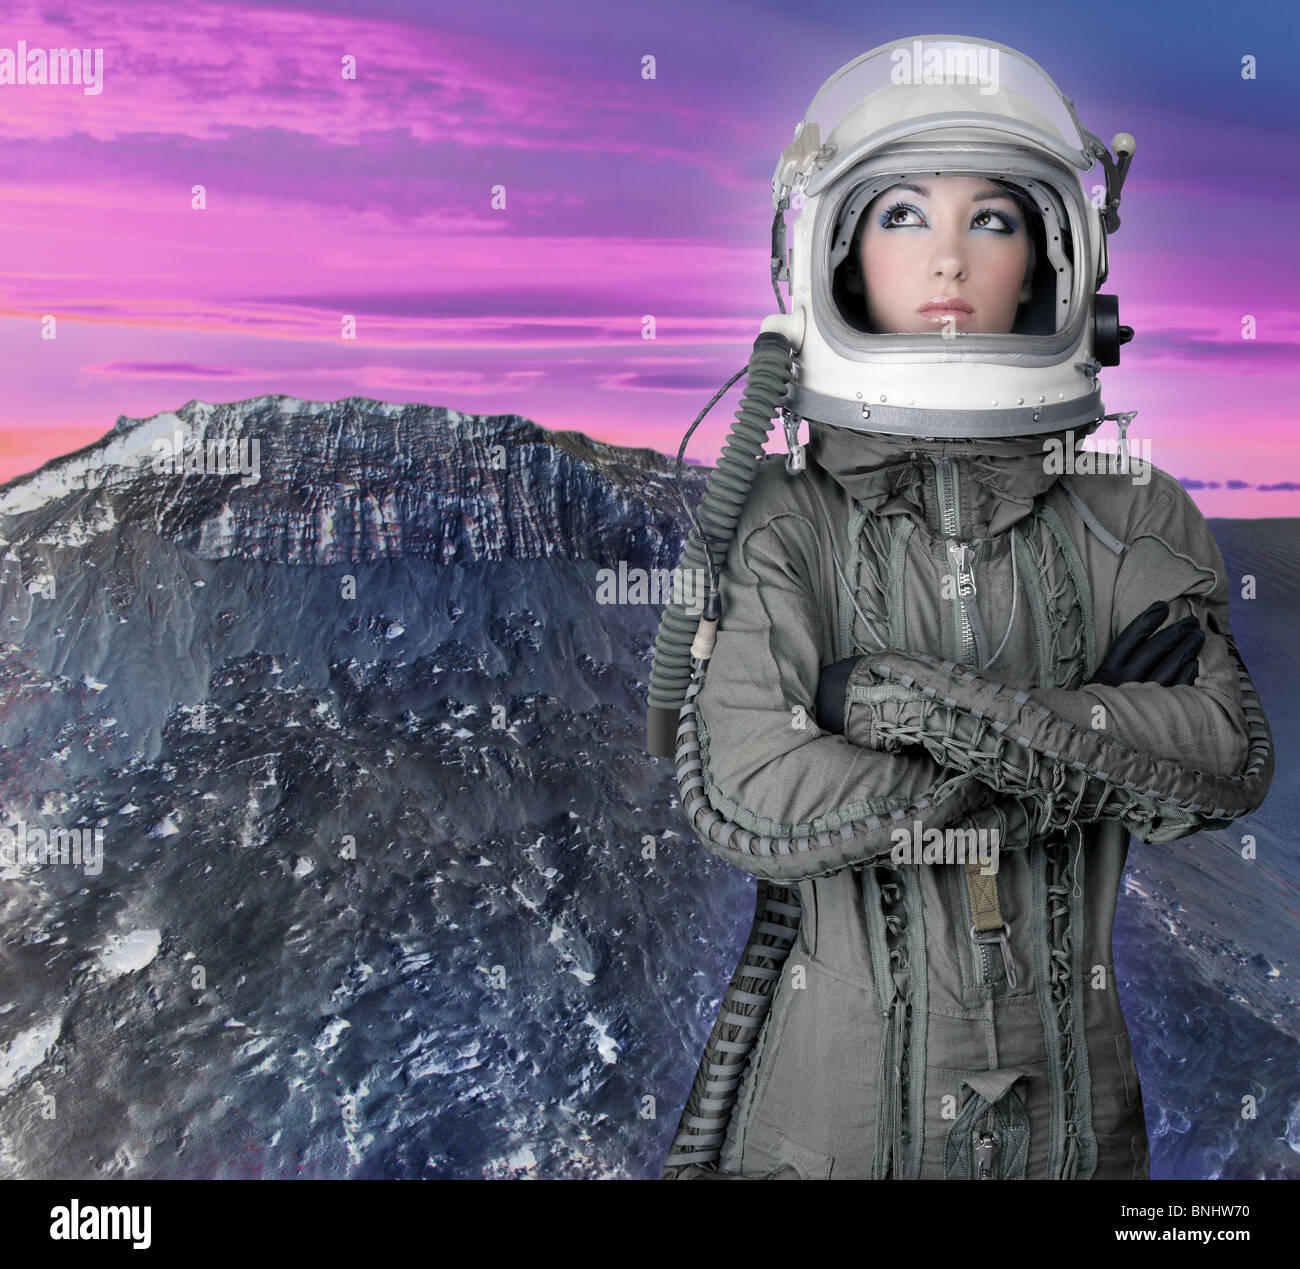 Future Alien Woman in Space Style Stock Photo - Image of cosmic